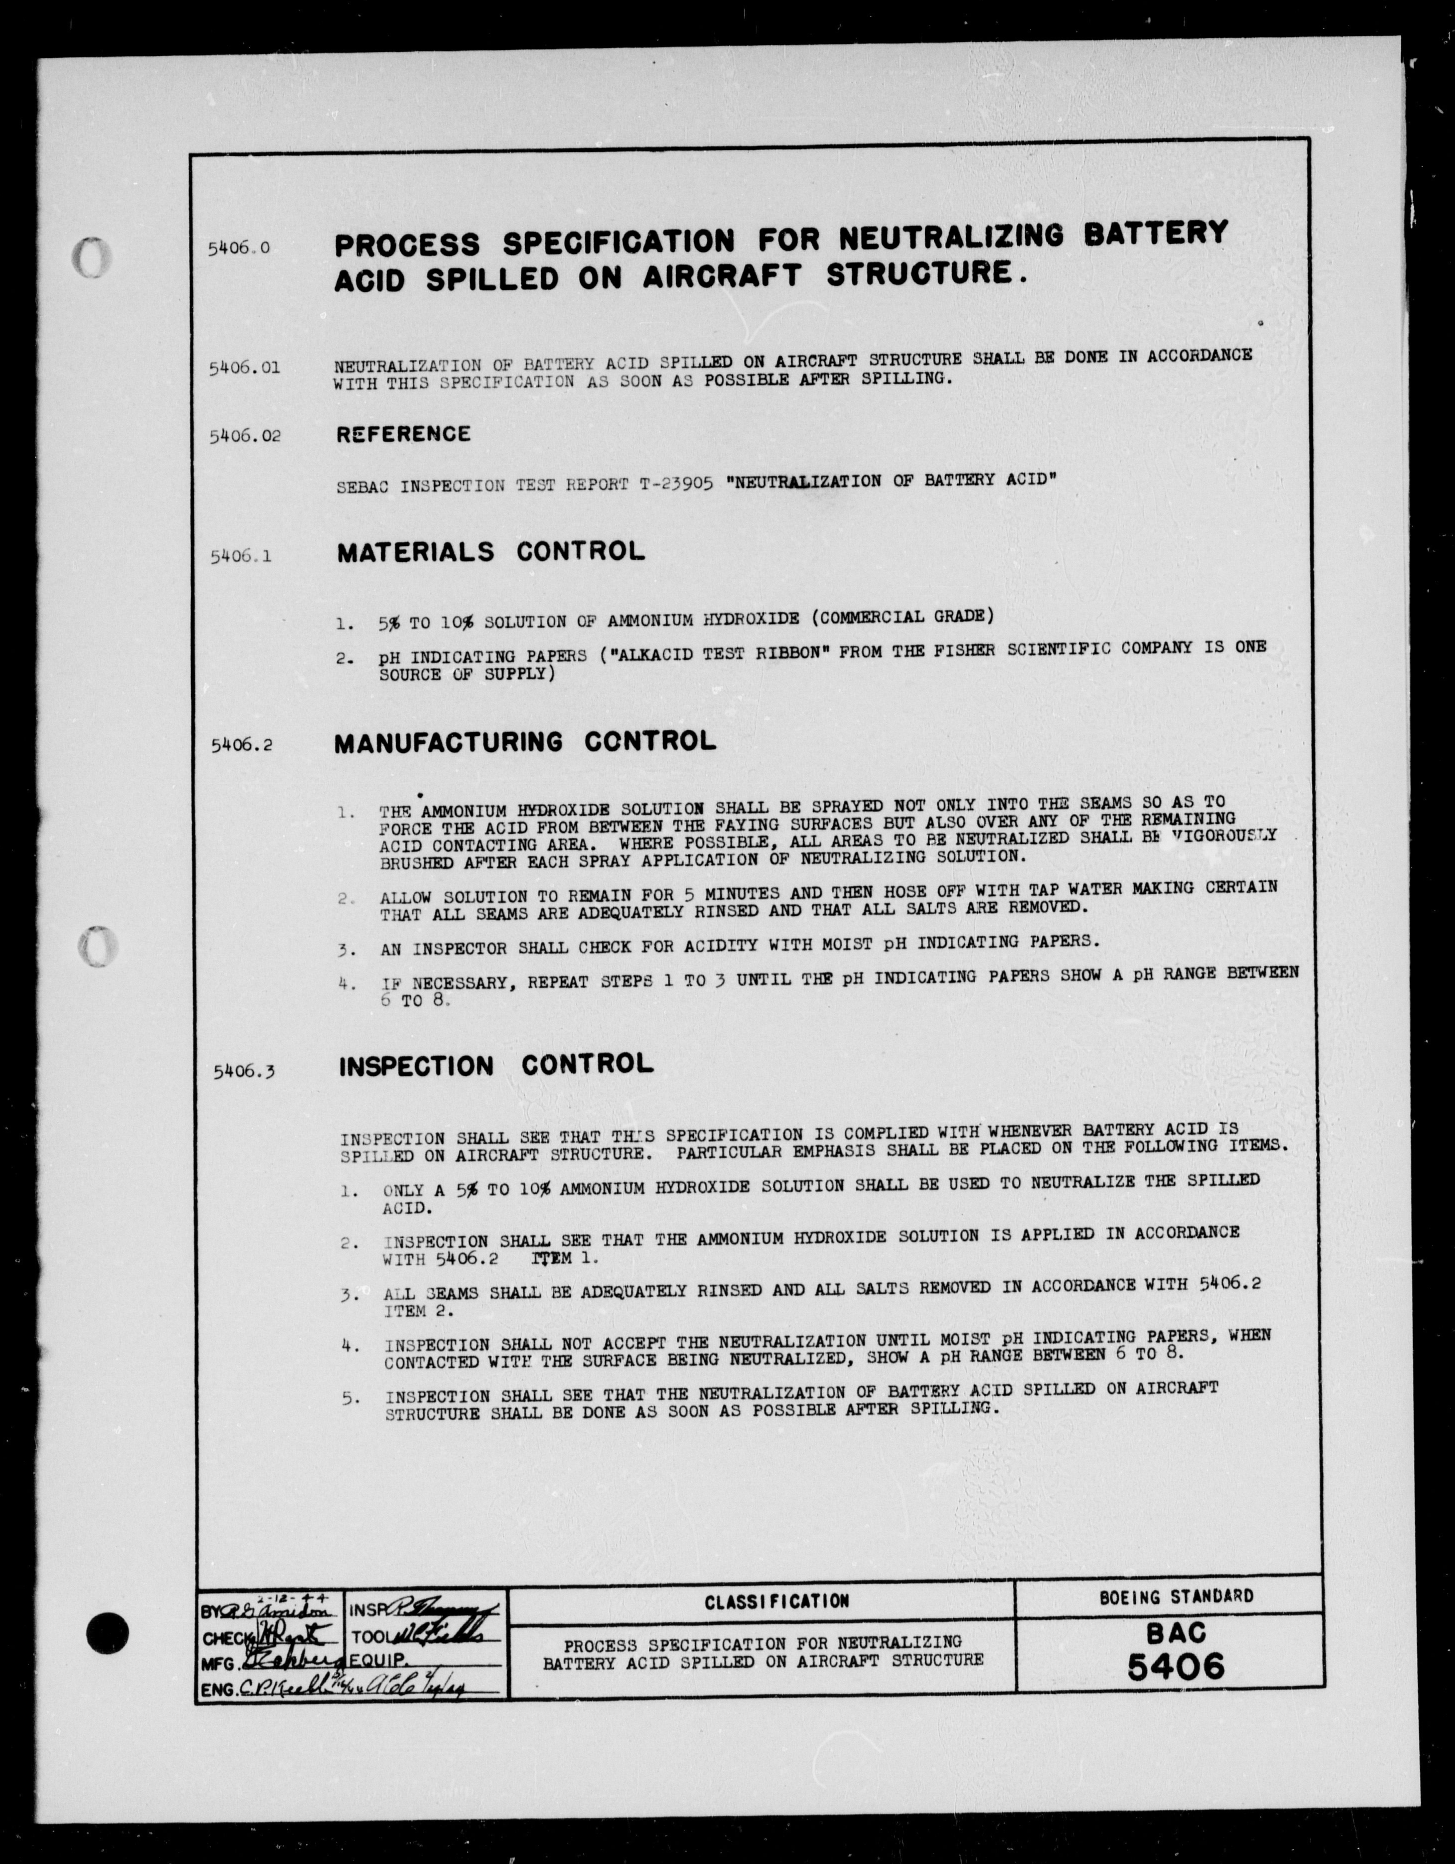 Sample page 1 from AirCorps Library document: Neutralizing Batter Acid Spilled on Aircraft Structure